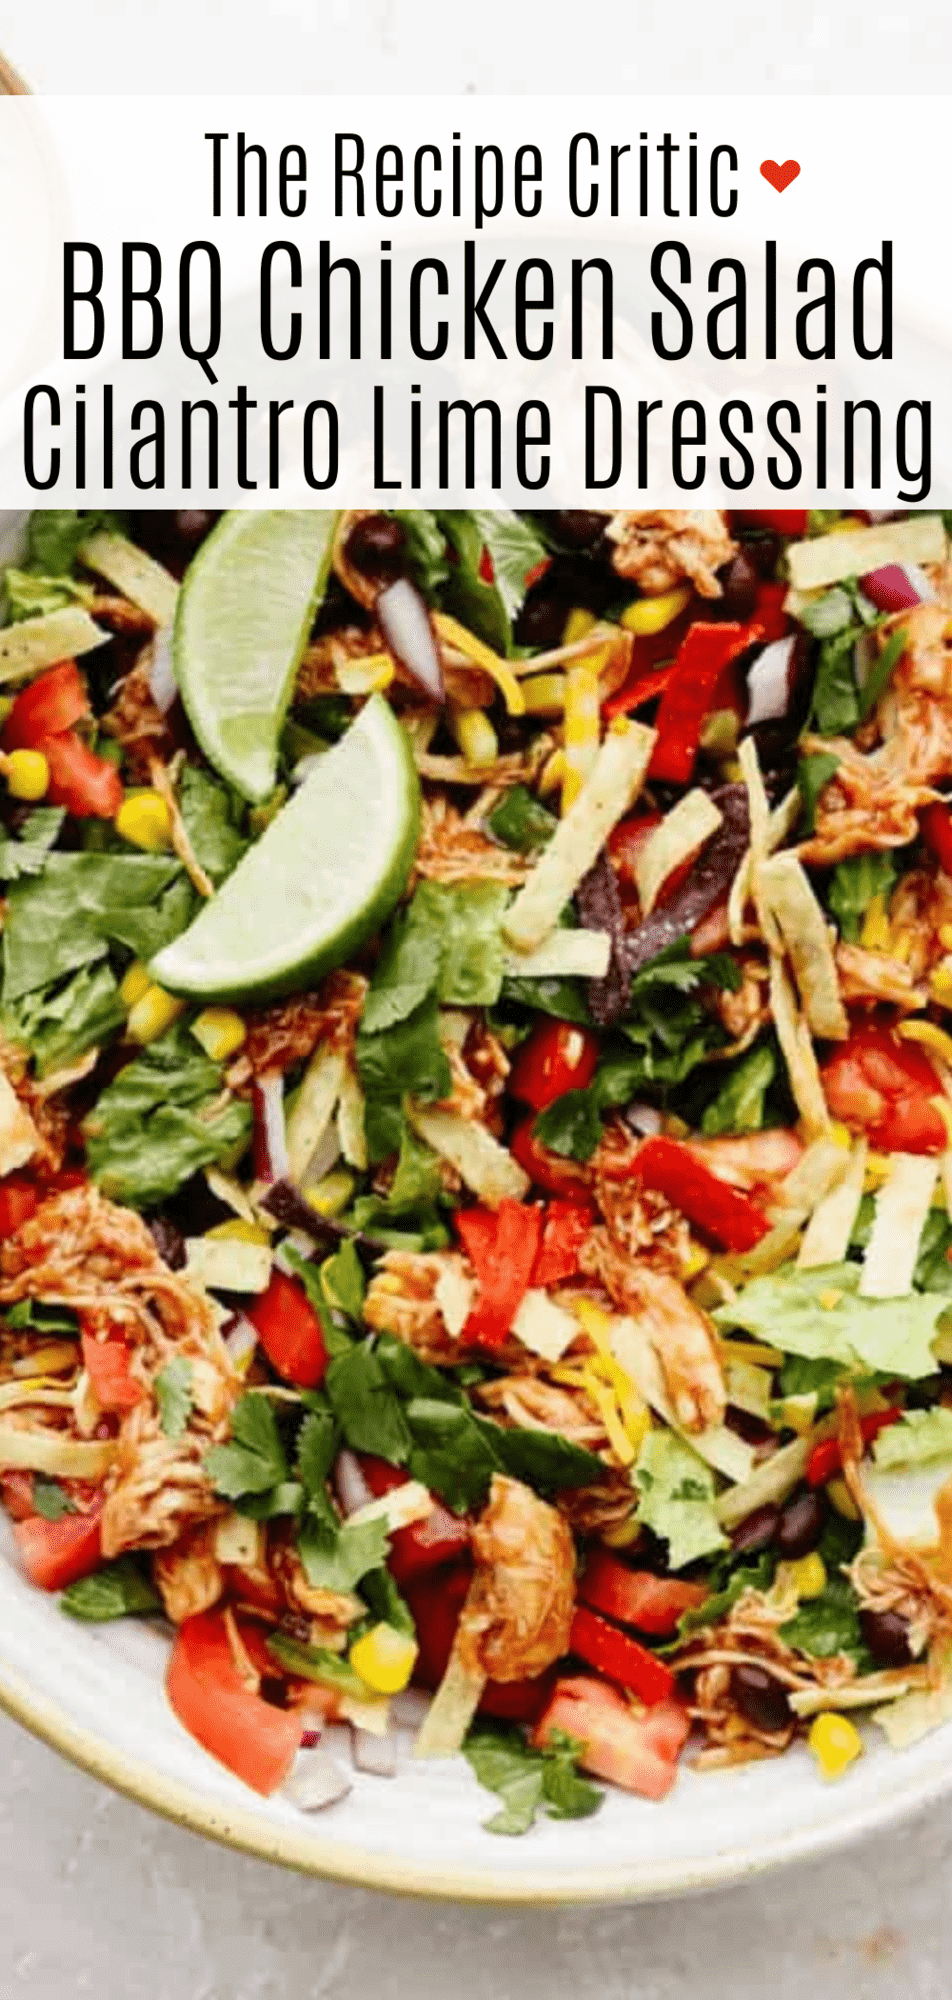 BBQ Chicken Salad with BBQ Cilantro Lime Dressing - 84